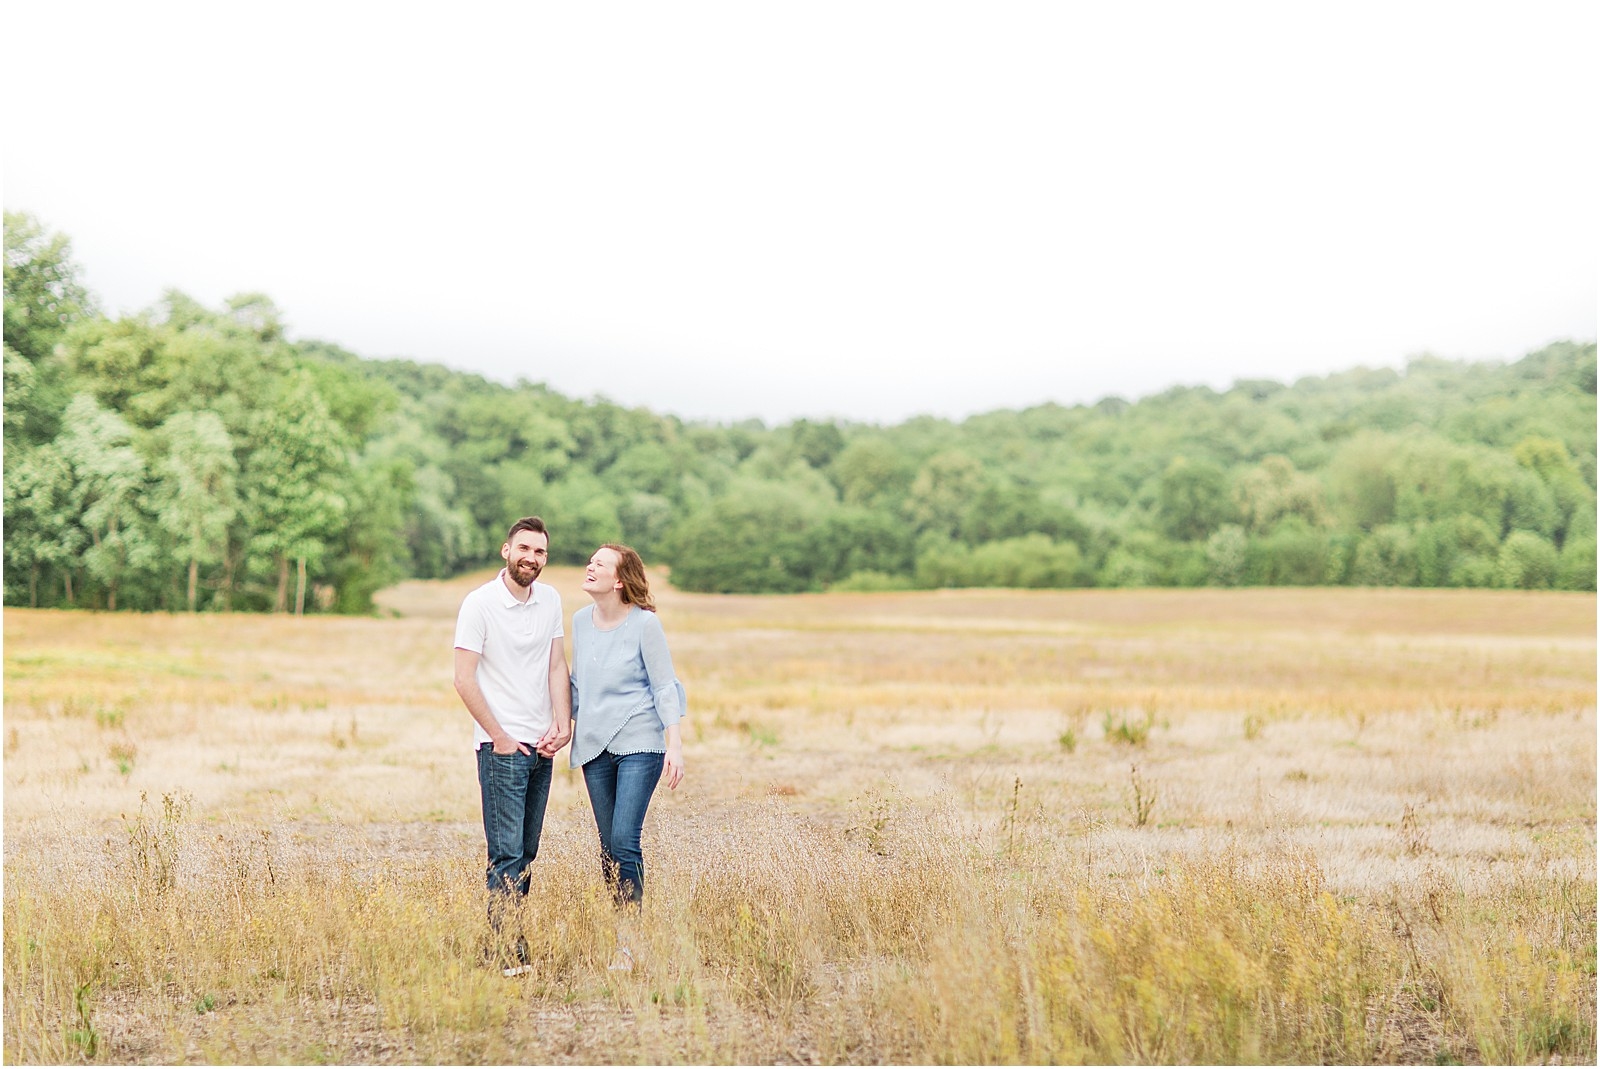 Amy and Logan | The Corner House Bed and Breakfast | Engagement Session009.jpg